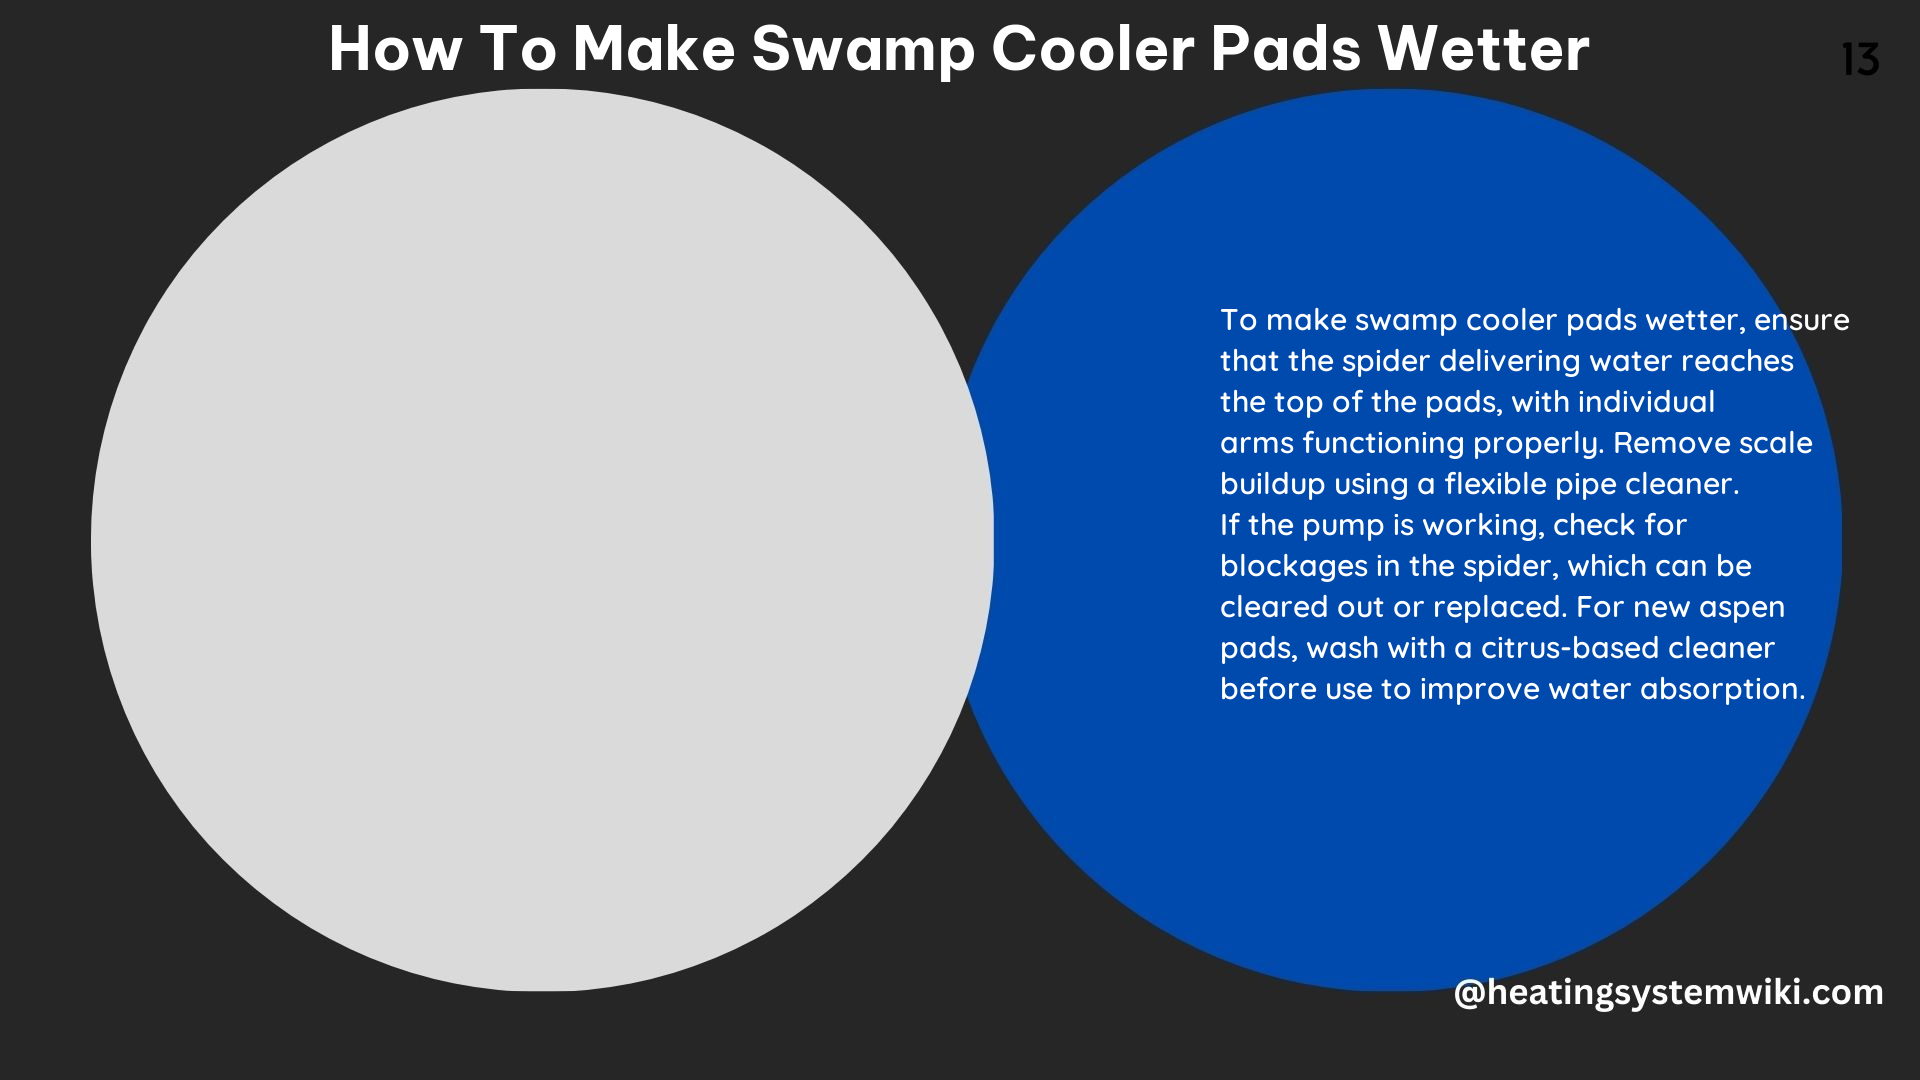 How to Make Swamp Cooler Pads Wetter